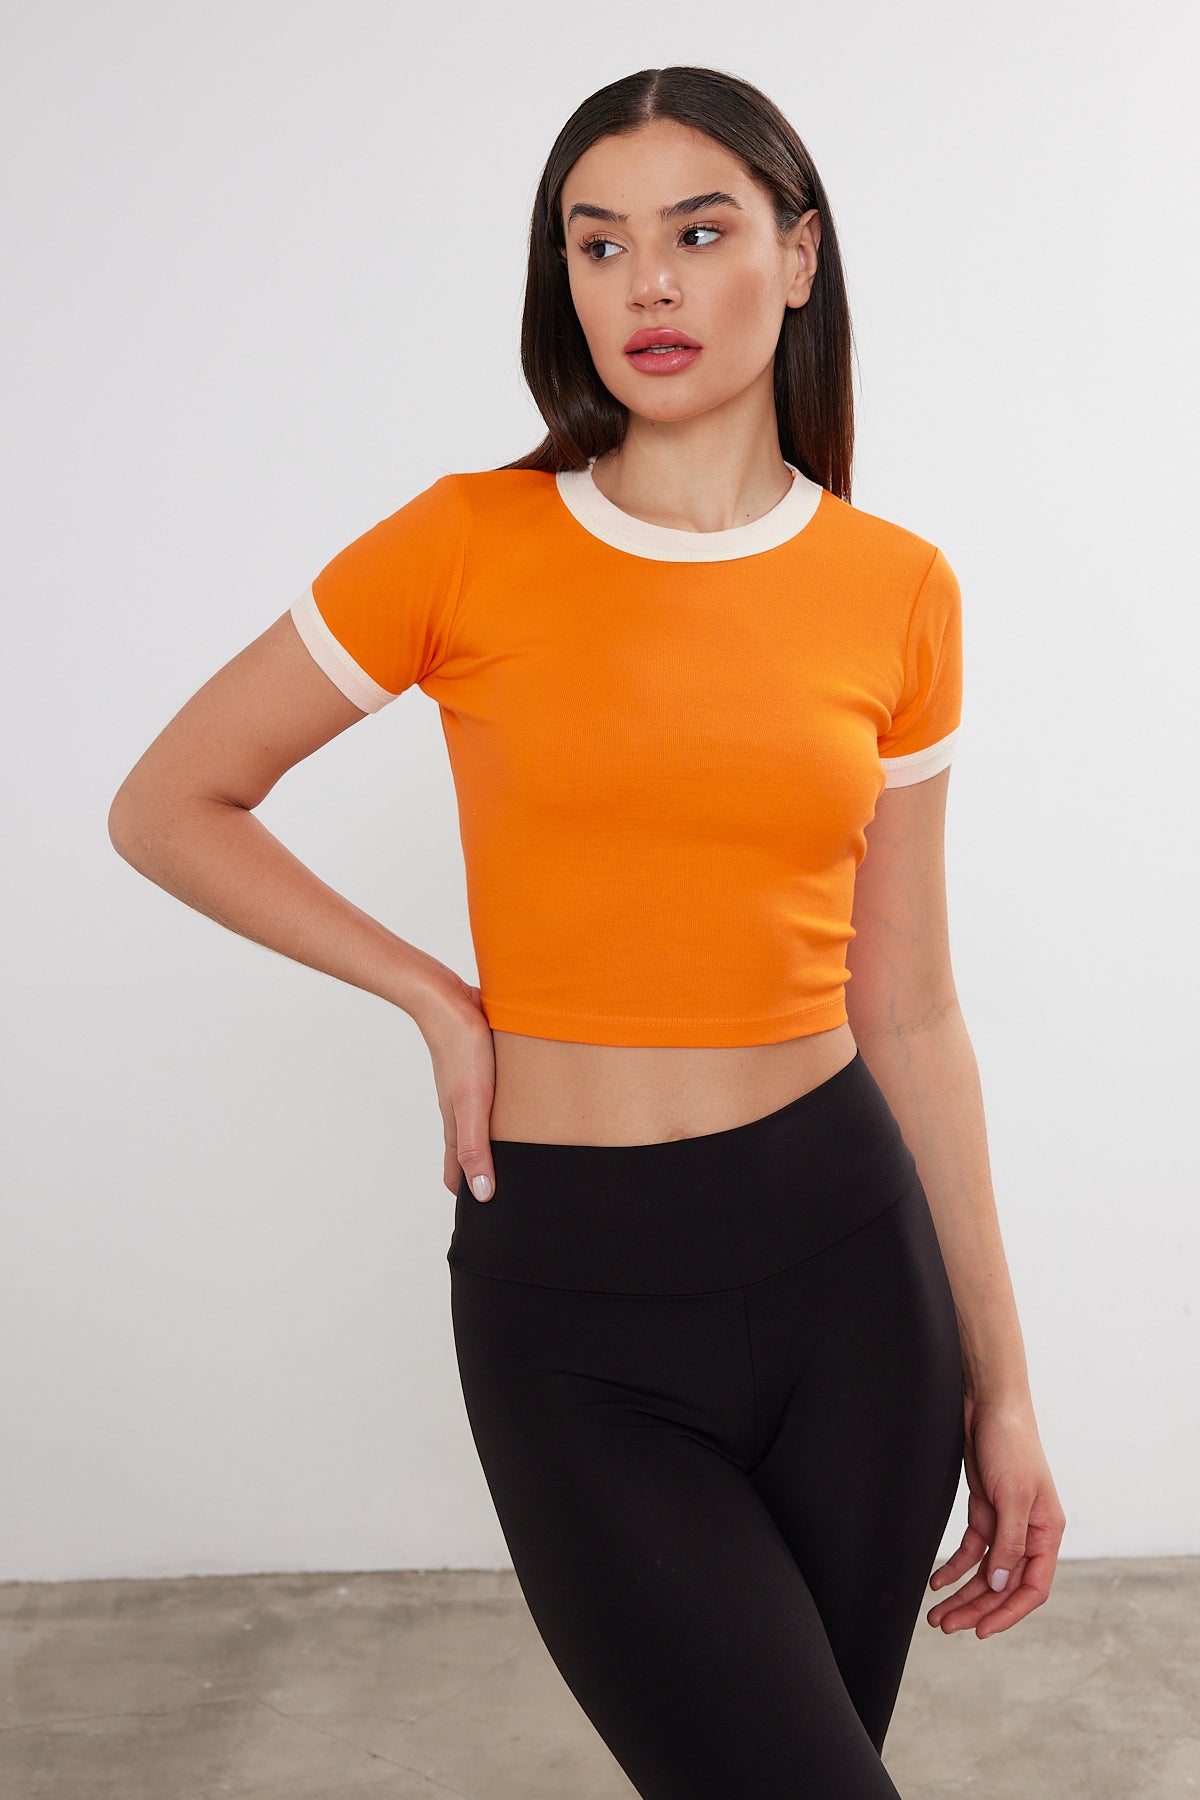 Custom Blank Crop Top Two Tone Cotton Crop Top S-M-L (2-2-2) 6 PIECES